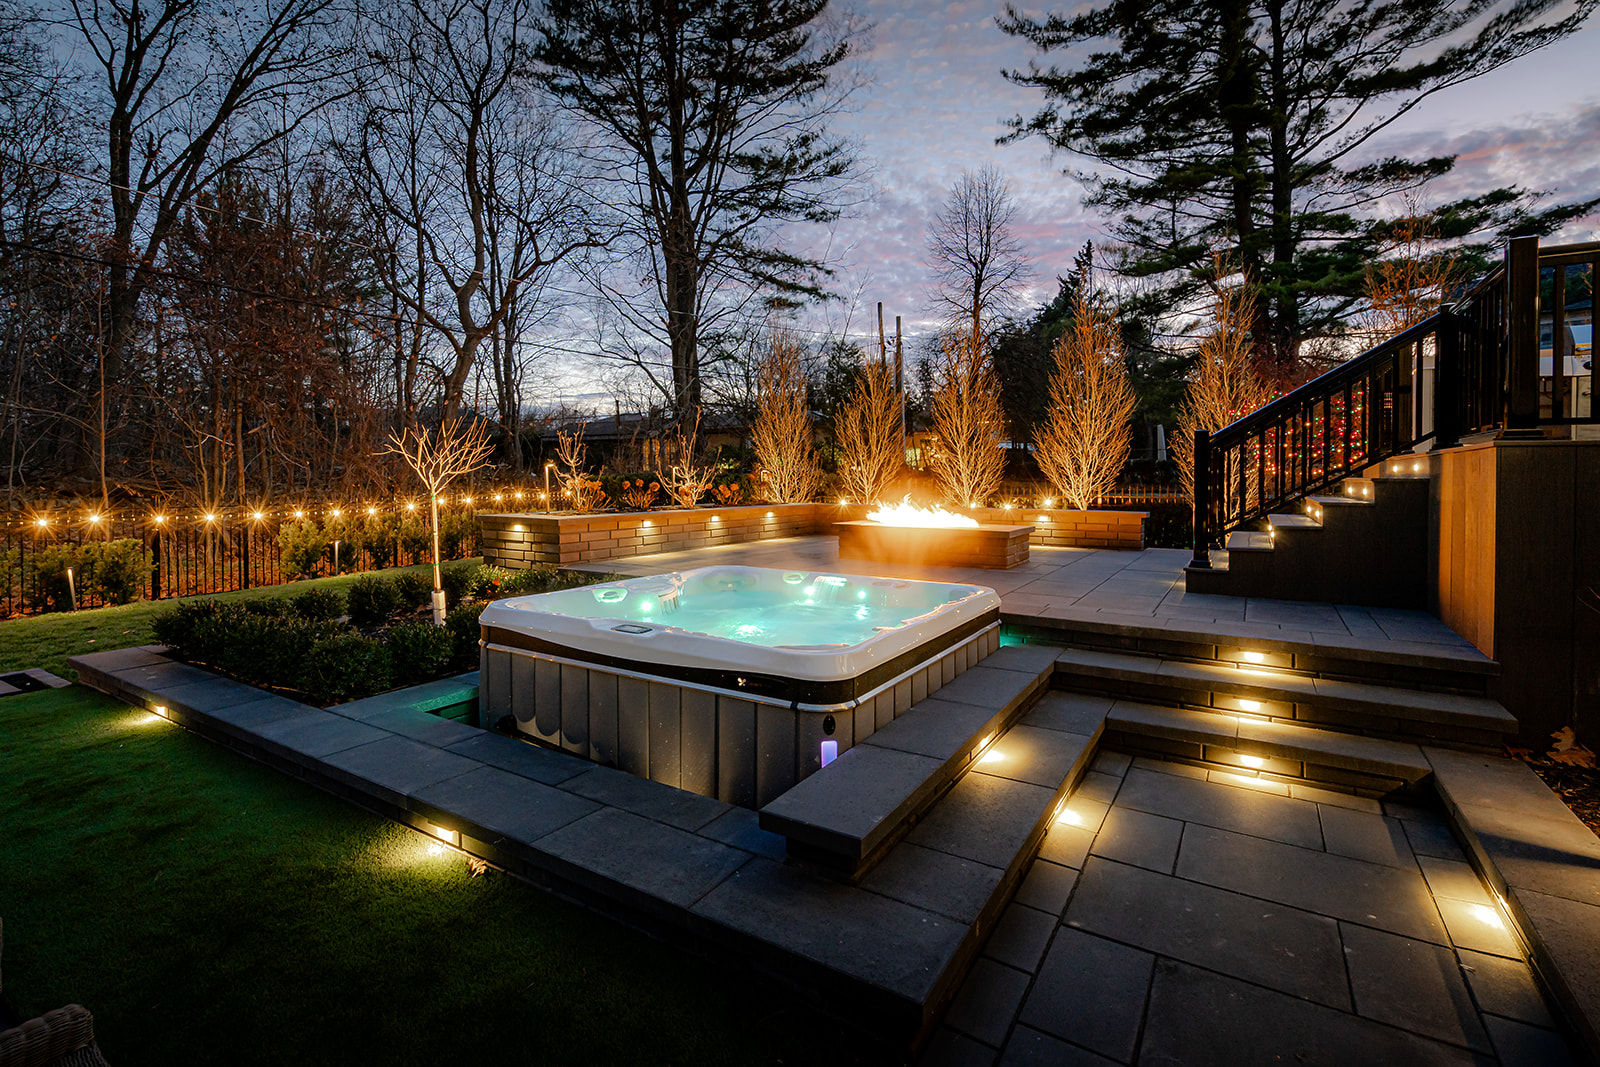 A fireplace and a jacuzzi with lounge chairs in the back yard.